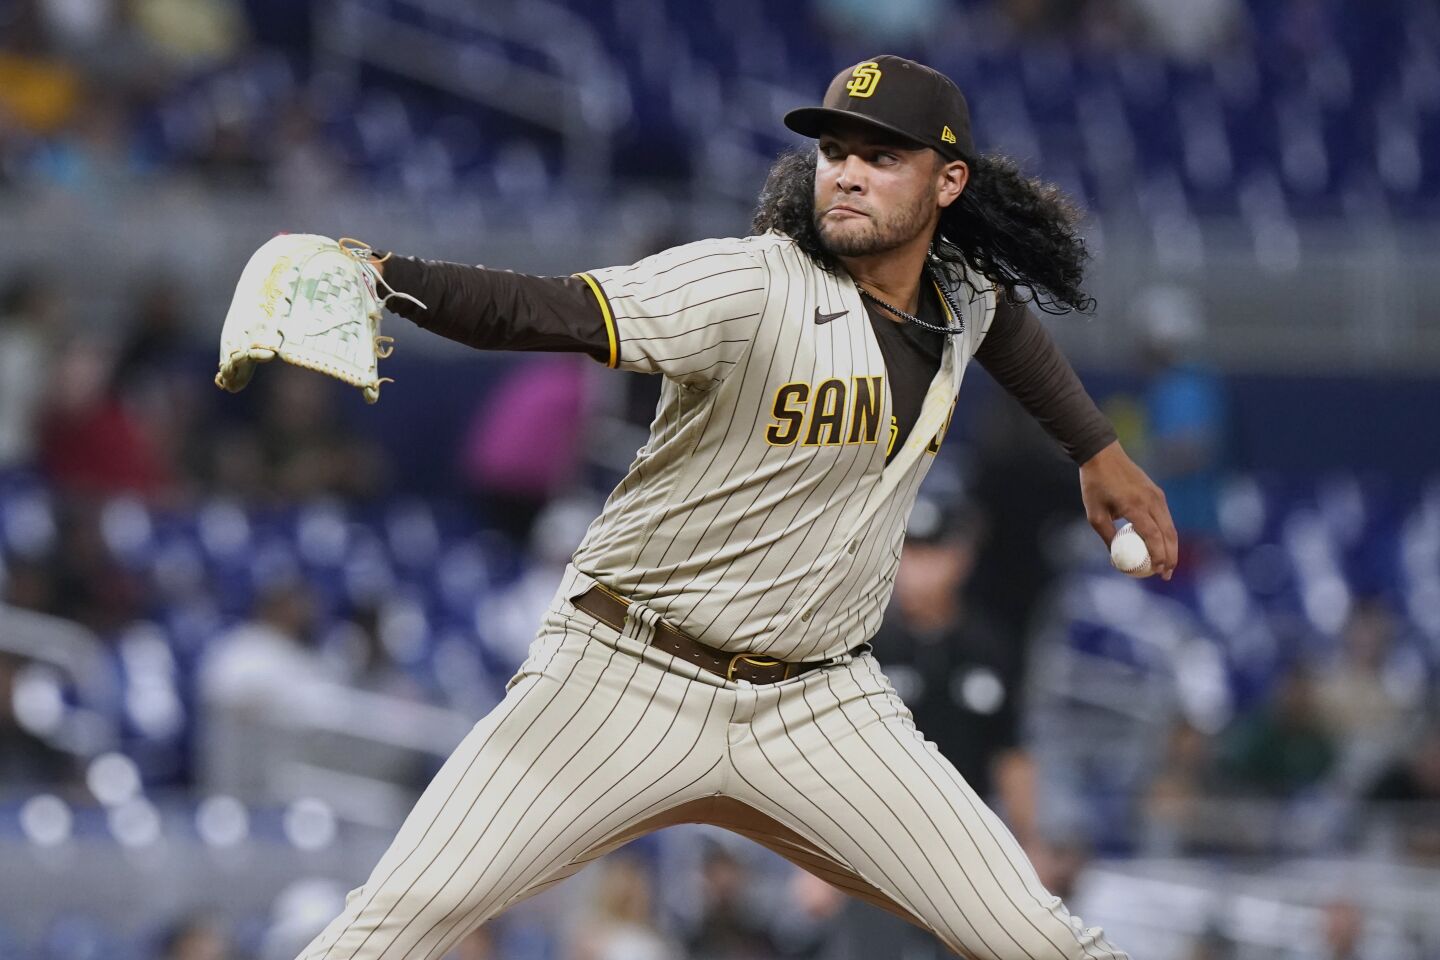 Game 4: Padres LHP Sean Manaea (6-6, 4.83 ERA)The 30-year-old acknowledged he was tired as he was pulled from Tuesday’s start after just four innings (3 ER) with just 64 pitches thrown. He struck out six. This is Manaea’s first career appearance against the Nationals.